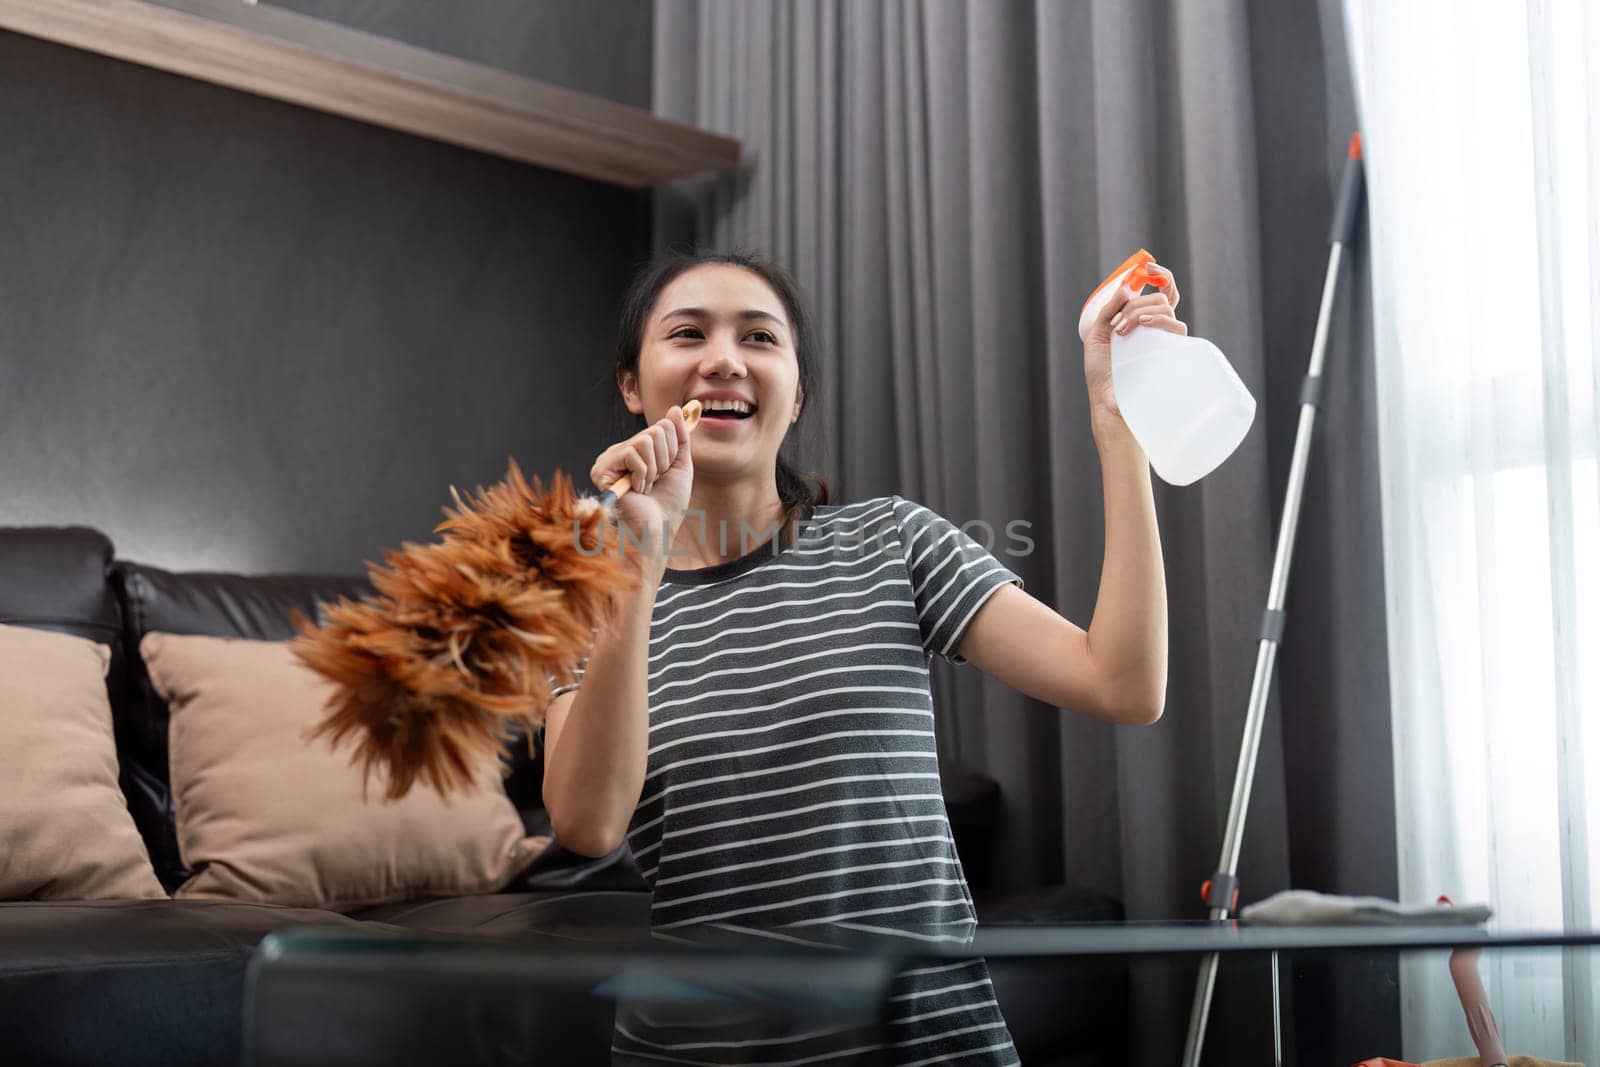 House cleaning with fun. Happy young asian housewife singing song during cleanup, using feather duster as microphone, enjoying domestic work. Young woman dancing and cleaning in living room.